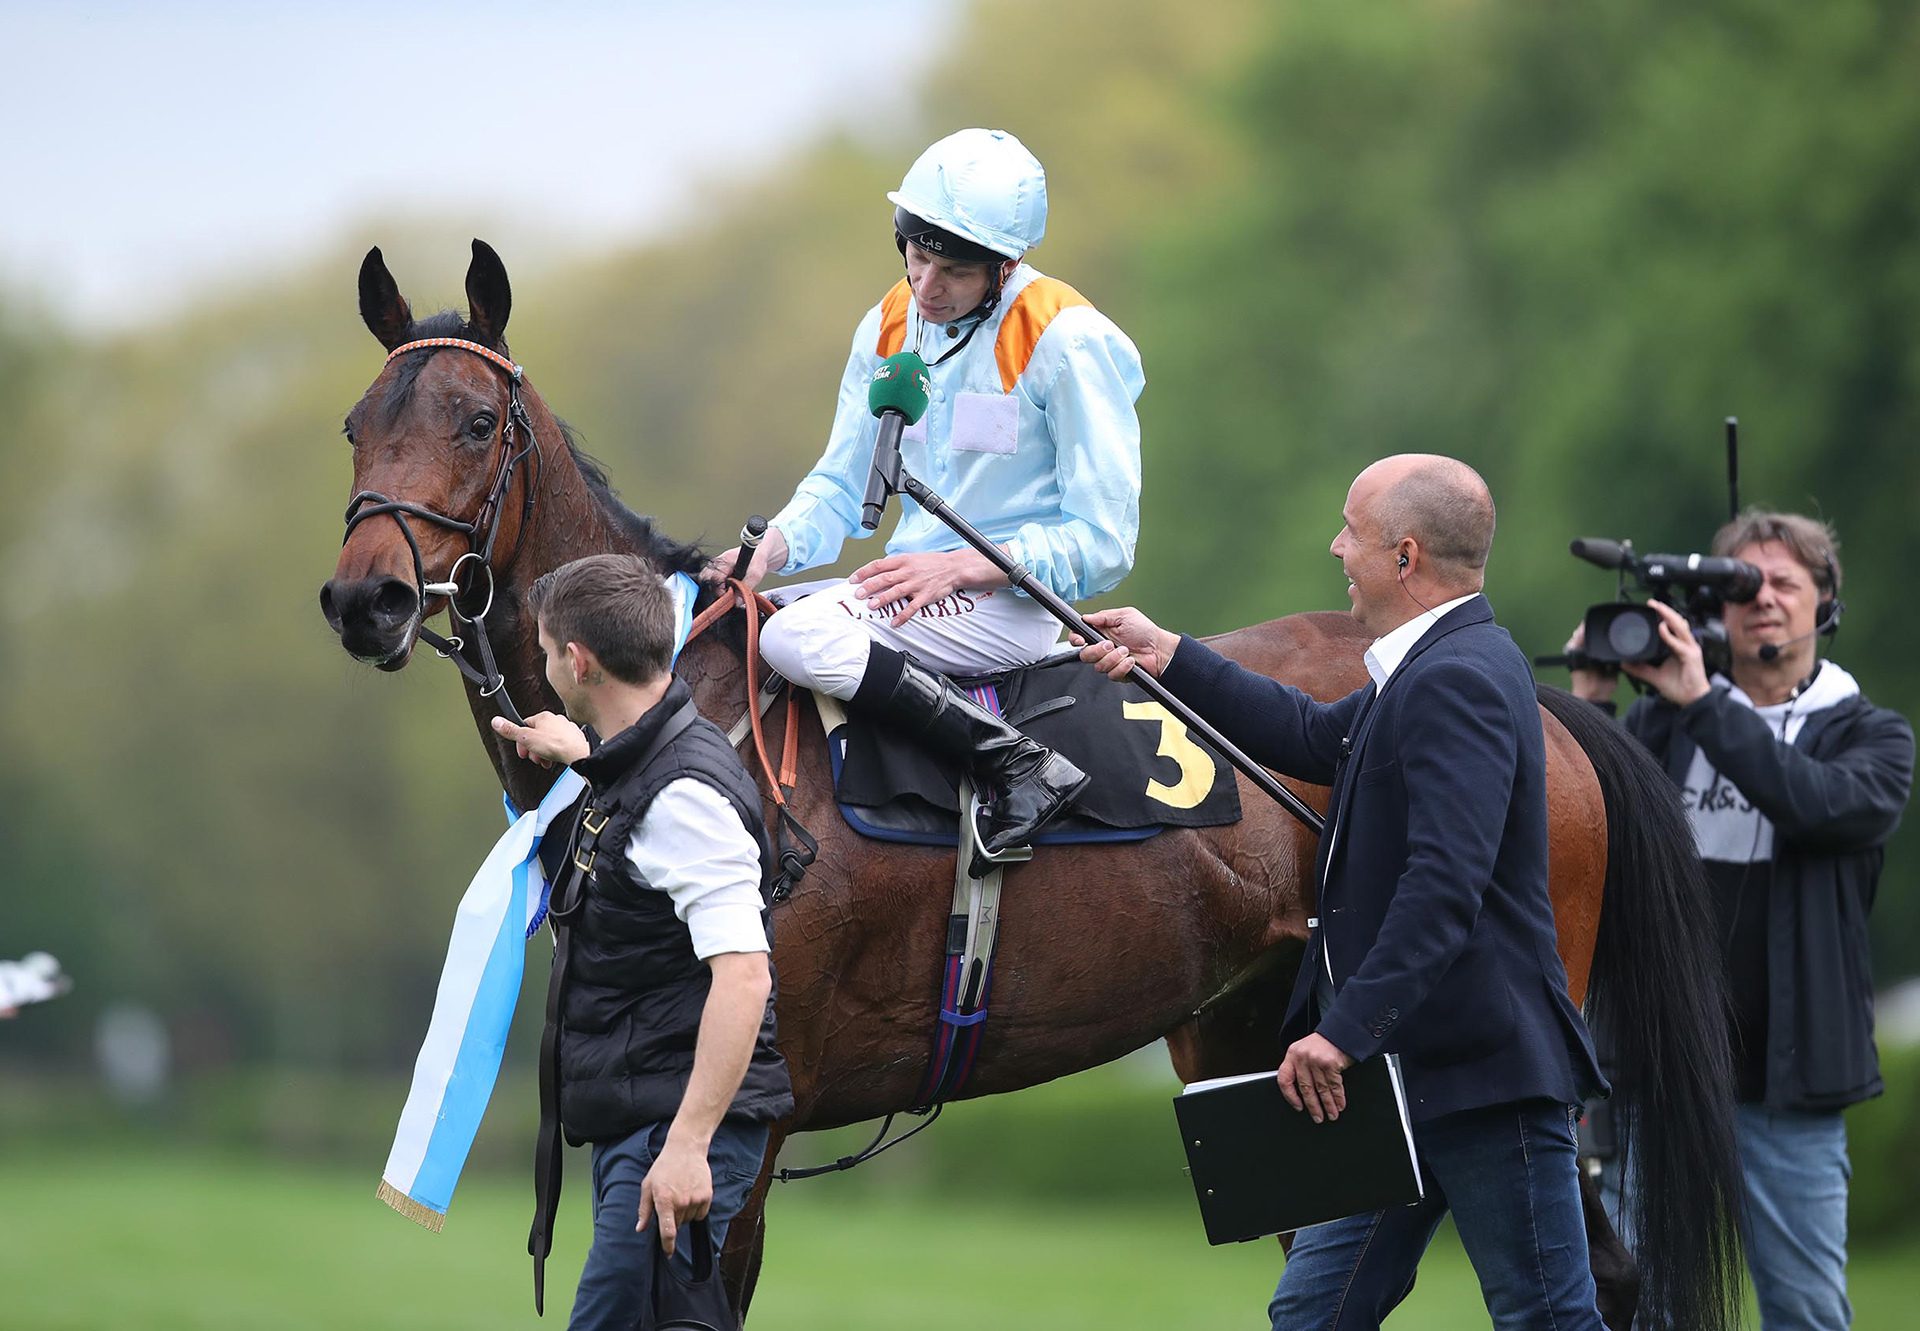 Brave Emperor (Sioux Nation) winning the Gr.3 Dr Busch Memorial at Krefeld